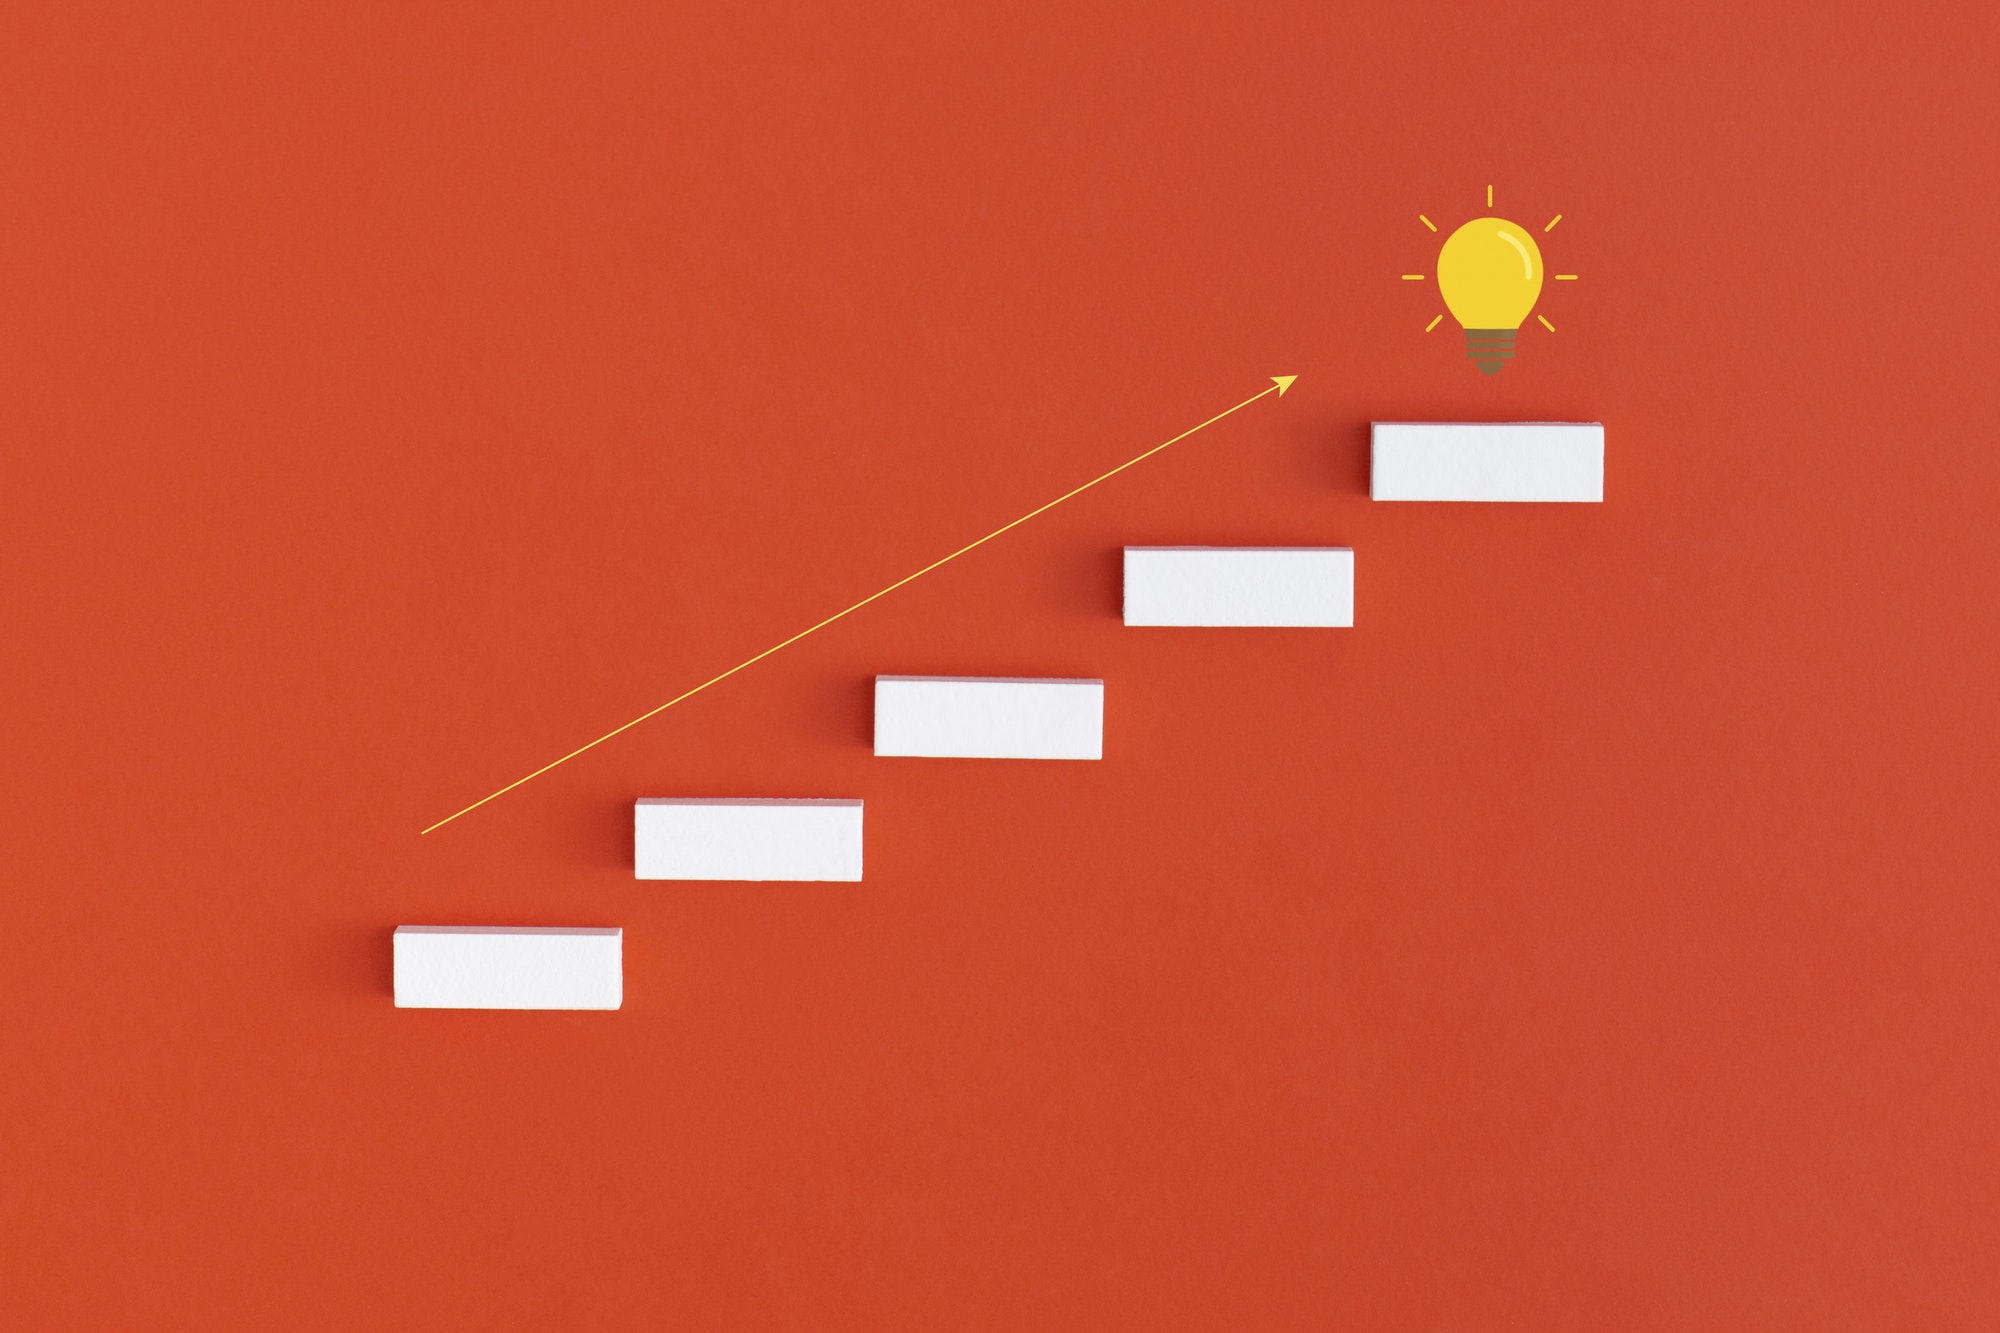 Ladder career path for business growth success process. Inspiration and creative idea concept.